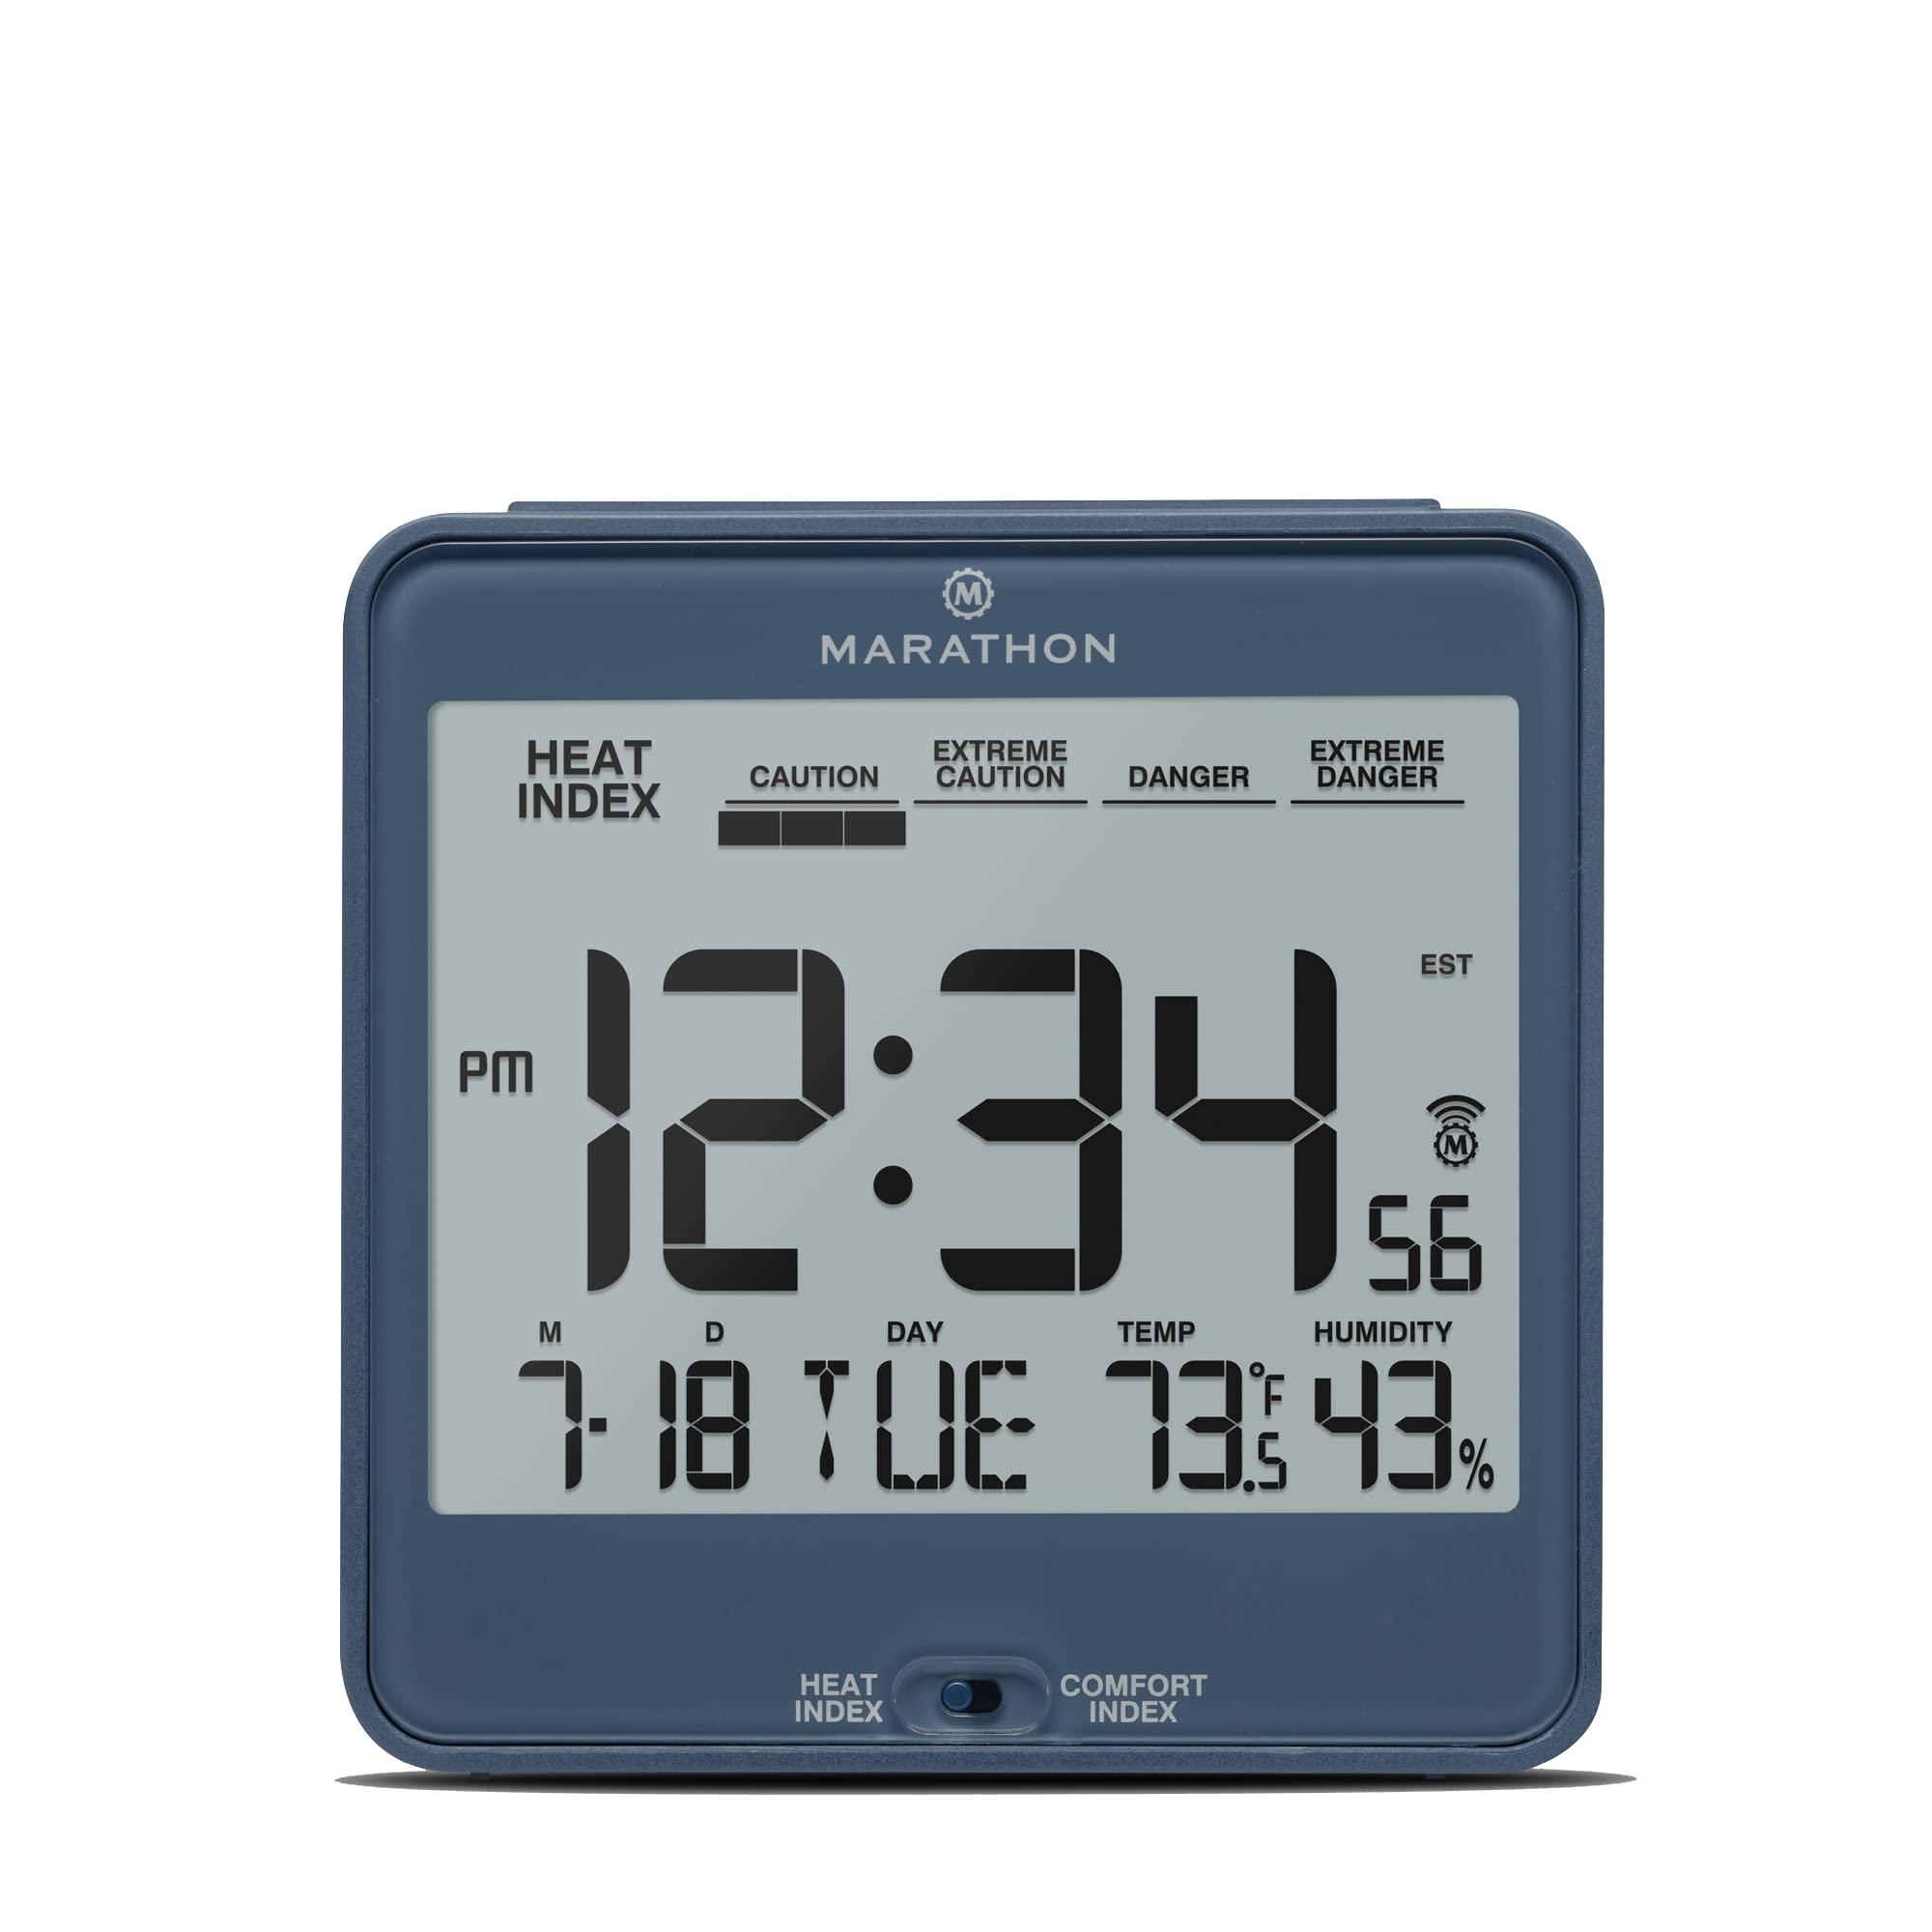 marathon atomic desk clock, blue - easy-to-read 5.2 display with calendar + heat & comfort index - includes alarm with snooze